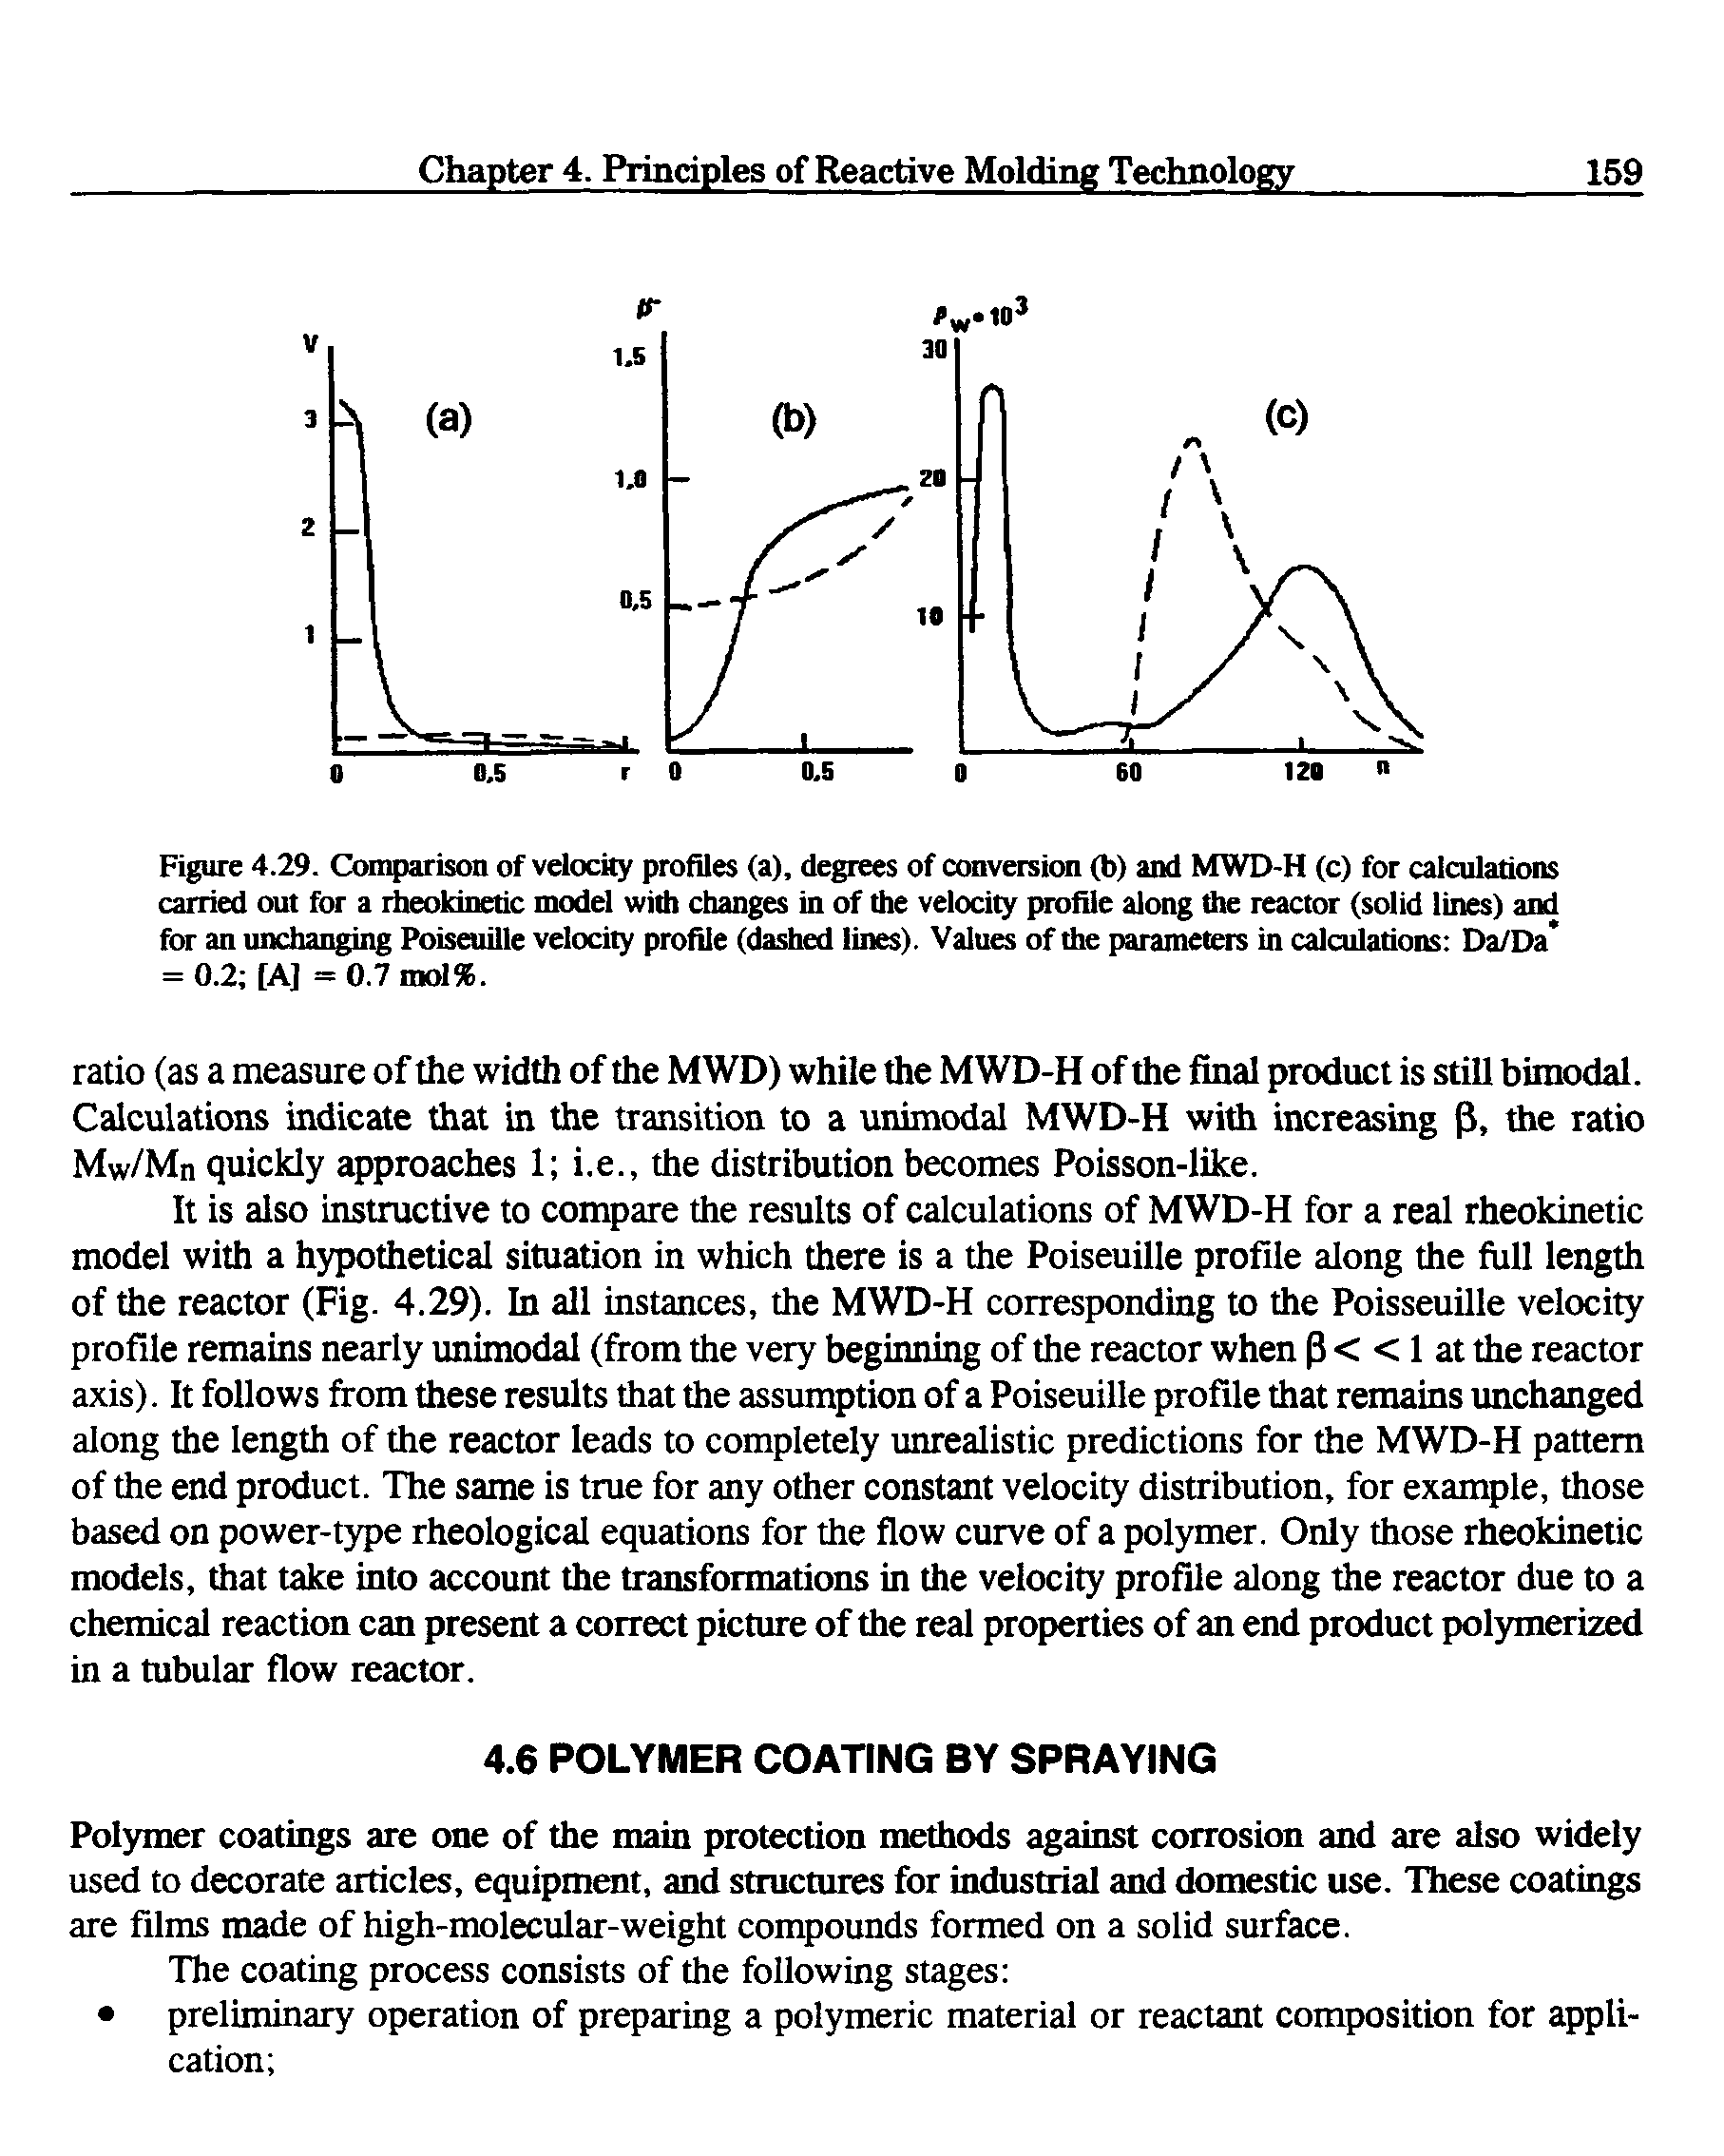 Figure 4.29. Comparison of velocity profiles (a), degrees of conversion (b) and MWD-H (c) for calculations carried out for a rheokinetic model with changes in of the velocity profile along the reactor (solid lines) and for an unchanging Poiseuille velocity profile (dashed lines). Values of the parameters in calculations Da/Da = 0.2 [A] = 0.7 mol%.